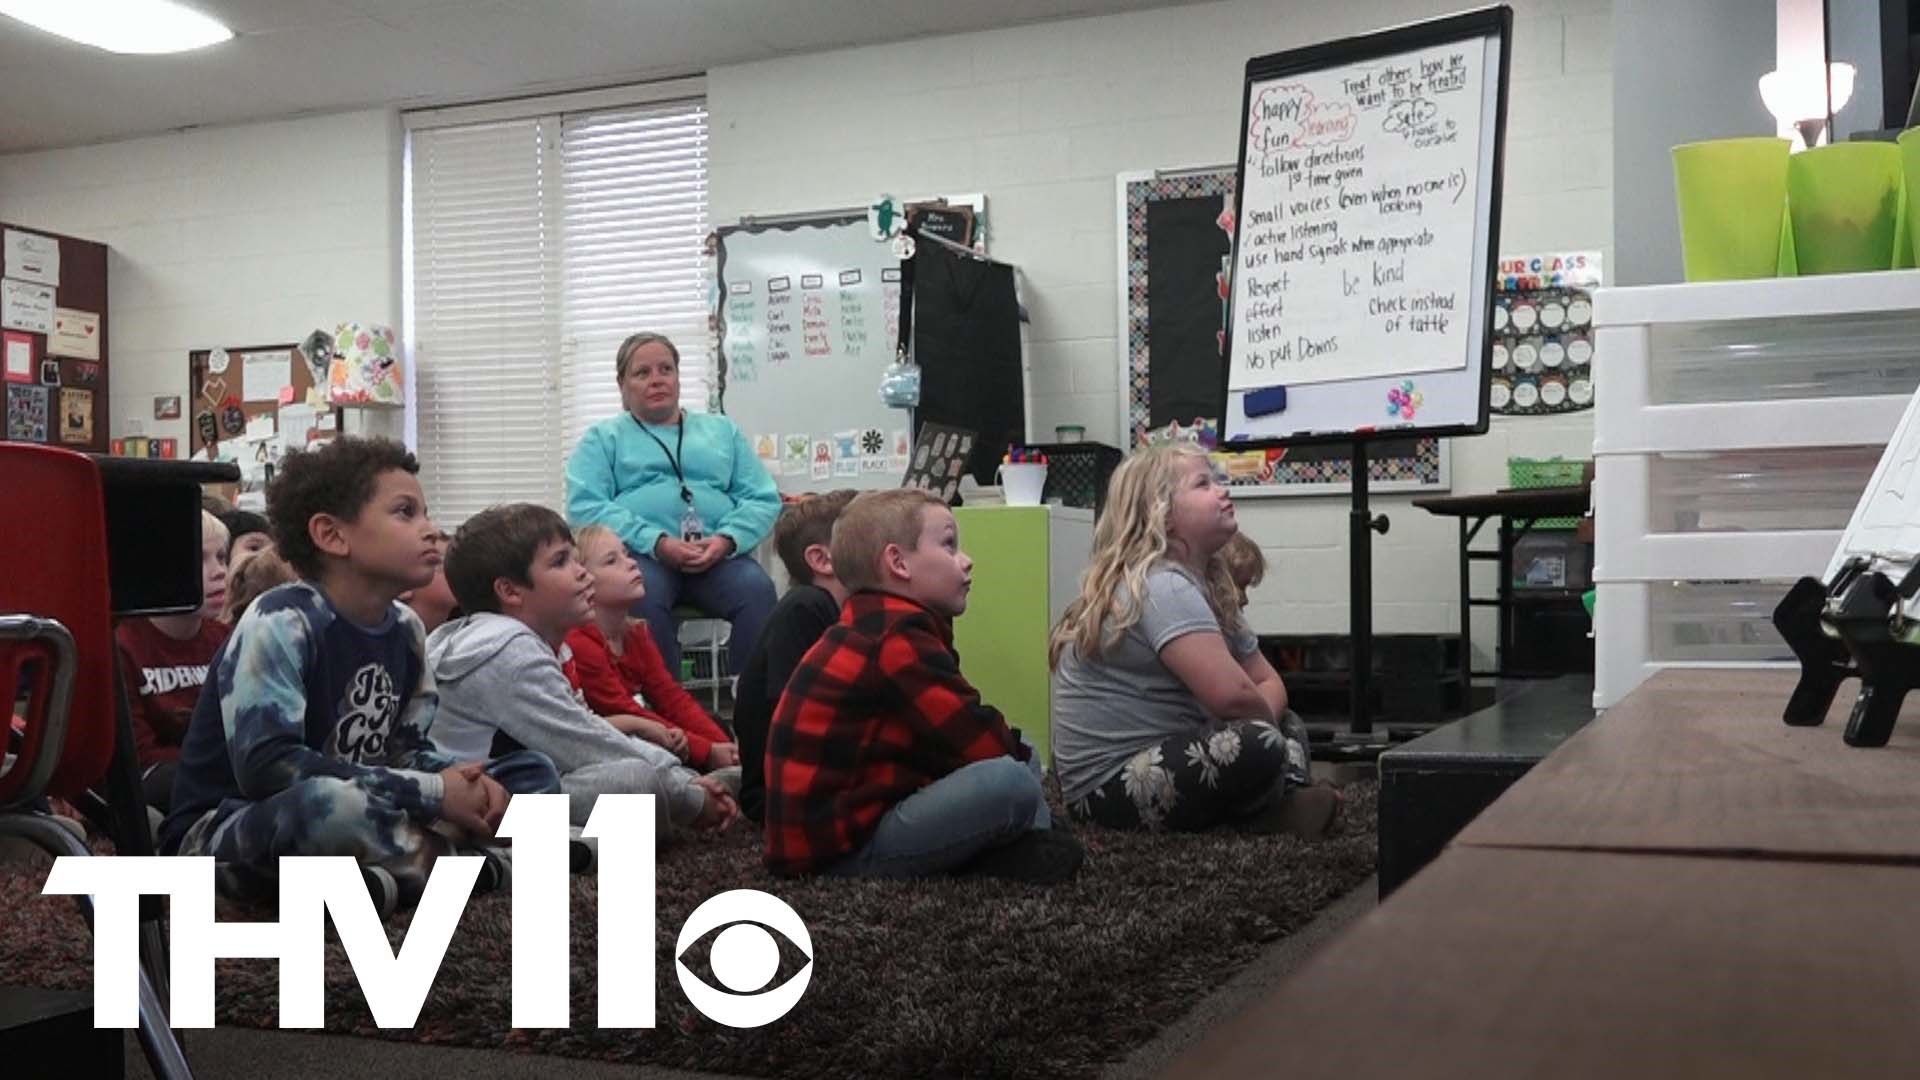 Young students in the Cabot School District spent Veteran's Day connecting with active service members through storytelling.